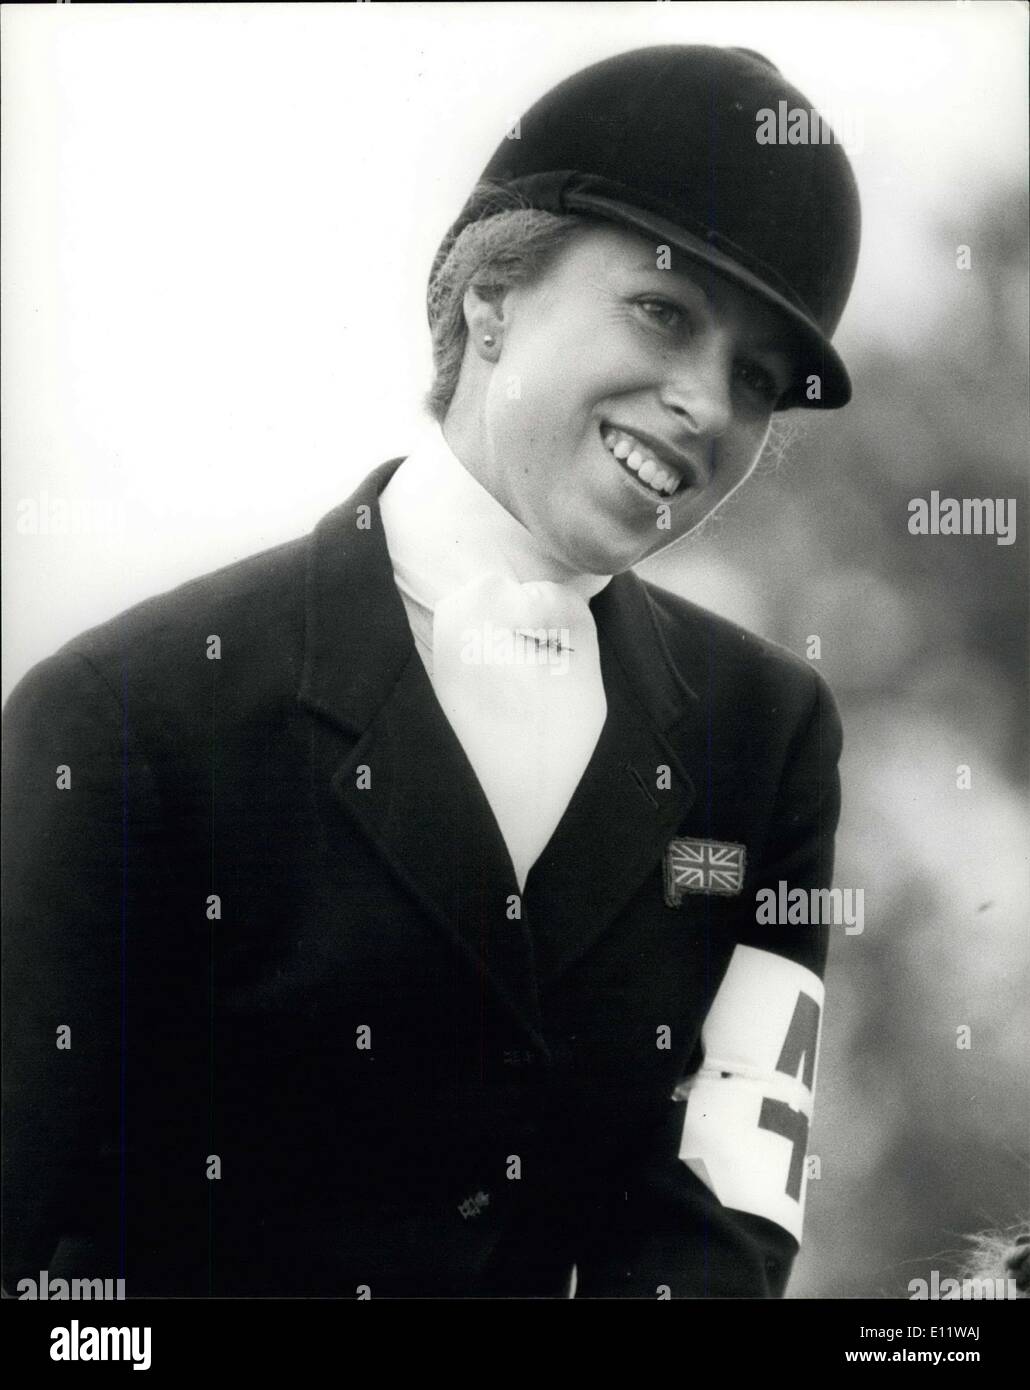 Aug. 15, 1980 - Princess Anne 30 today-takes Part in the Midland Bank Horse Trails at Locko Park: Princess Anne who celebrates her 30th birthday today, was spending the day with her husband Mark Phillips riding in the Midland Bank Horse Trails Championships of Great Britain, at Locko park, Darbyshire. Picture shows: A happy Princess Anne as she took part in the Dressage today. Stock Photo